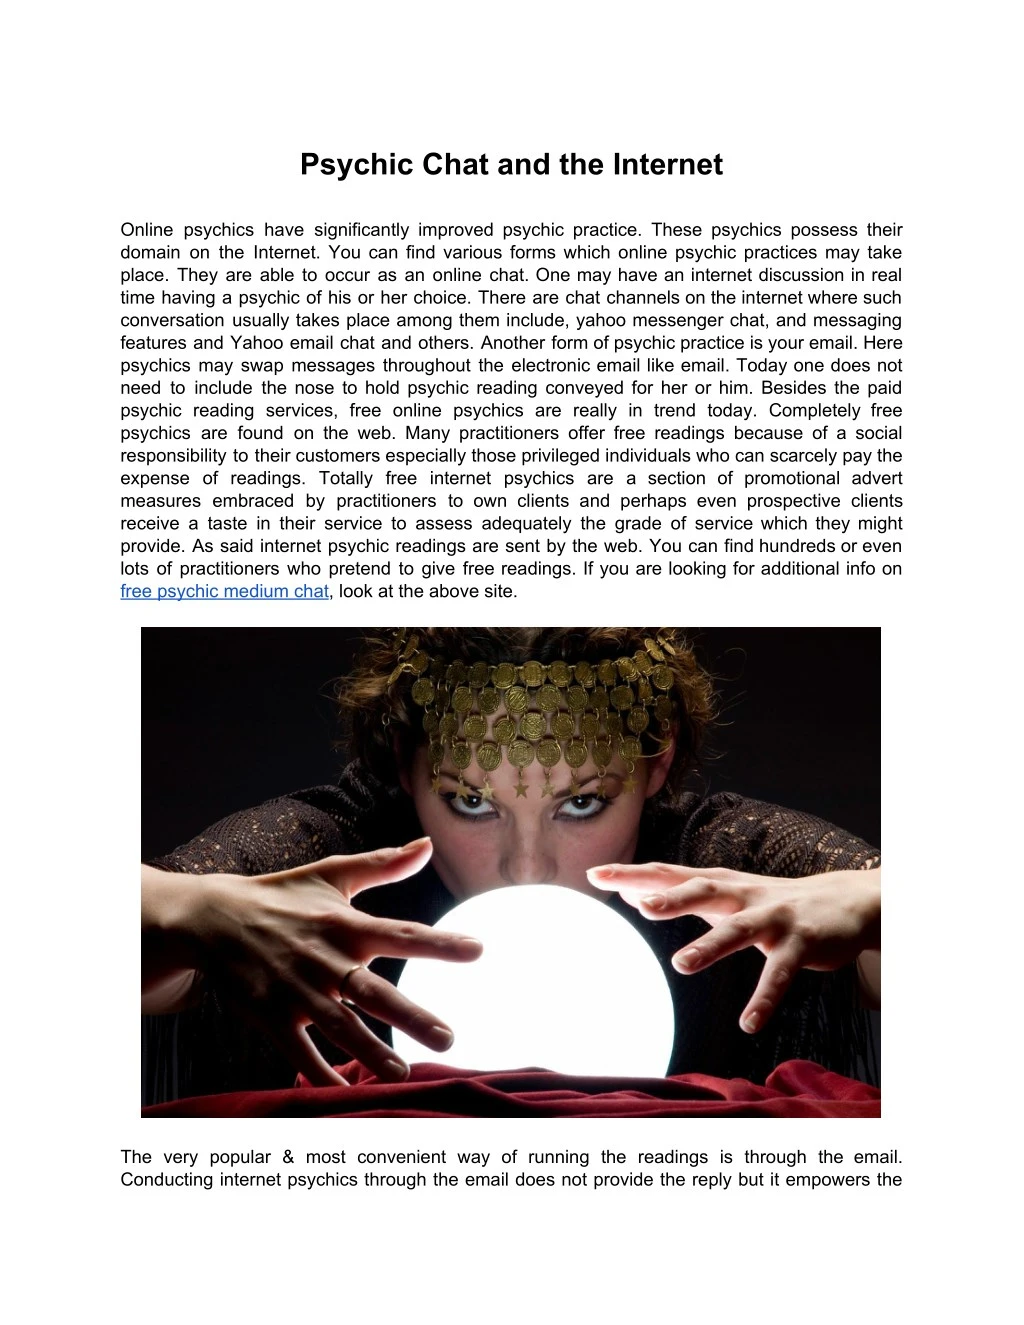 psychic chat and the internet online psychics